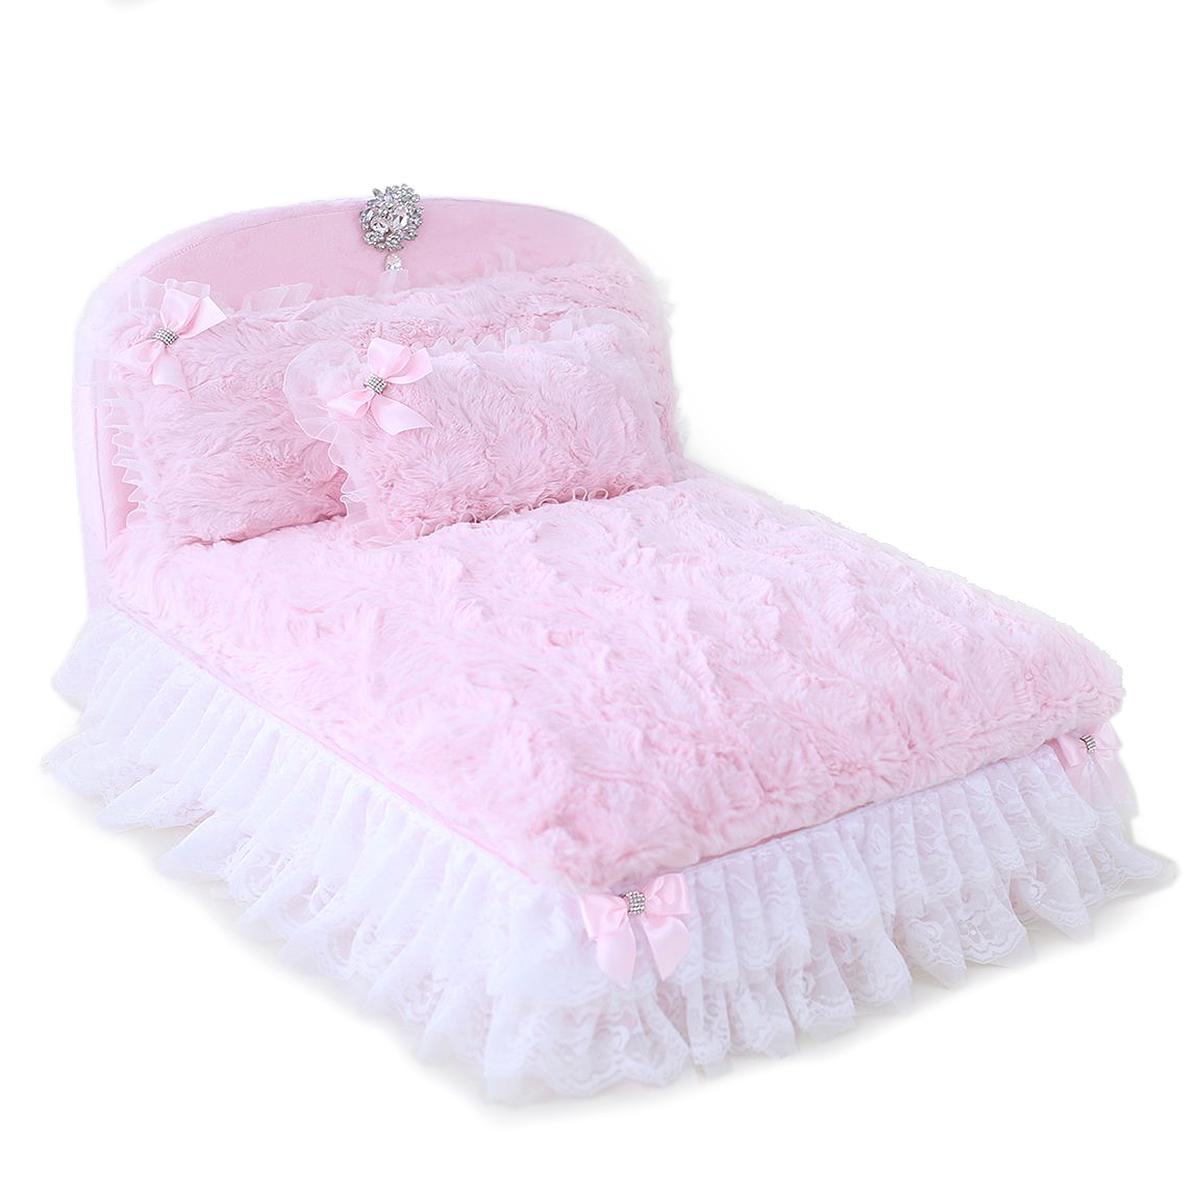 Hello Doggie Enchanted Nights Luxury Dog Bed - Baby Doll Pink